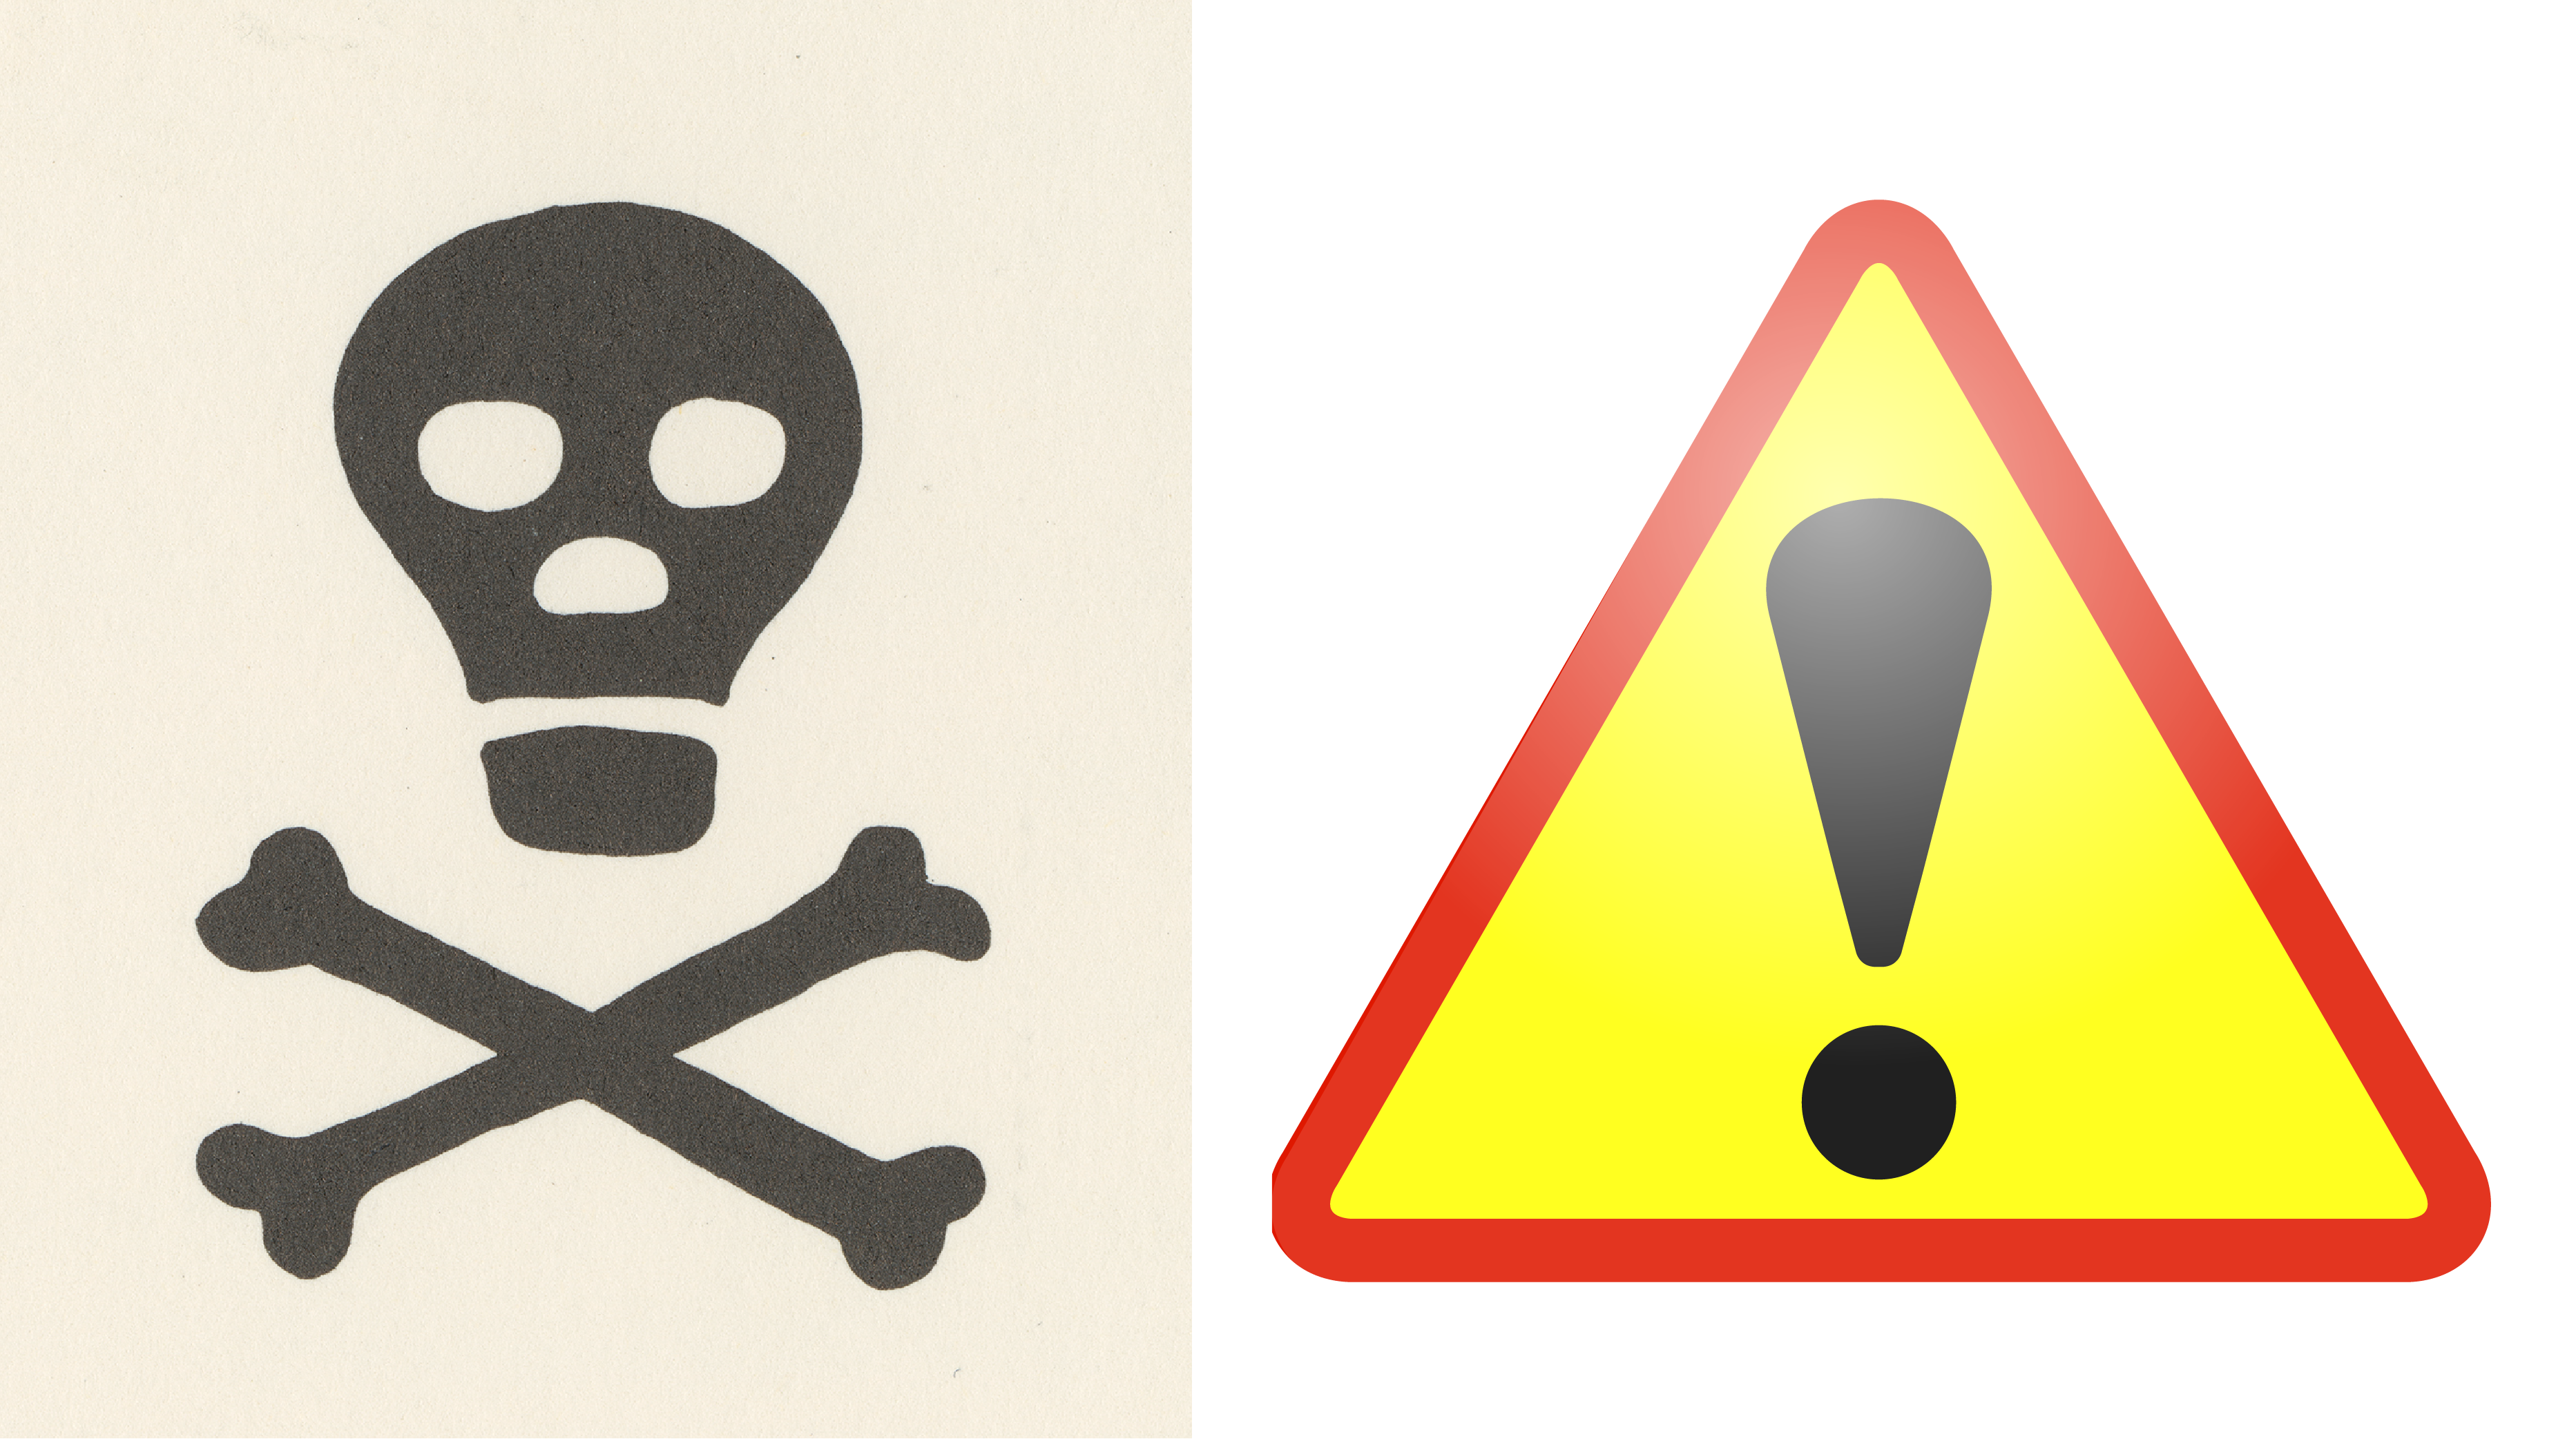 Side by side images of symbols for poison. On the left, a graphic depiction of a skull and crossbones; on the right, a yellow triangle with a red outline and a black exclamation point in the center.